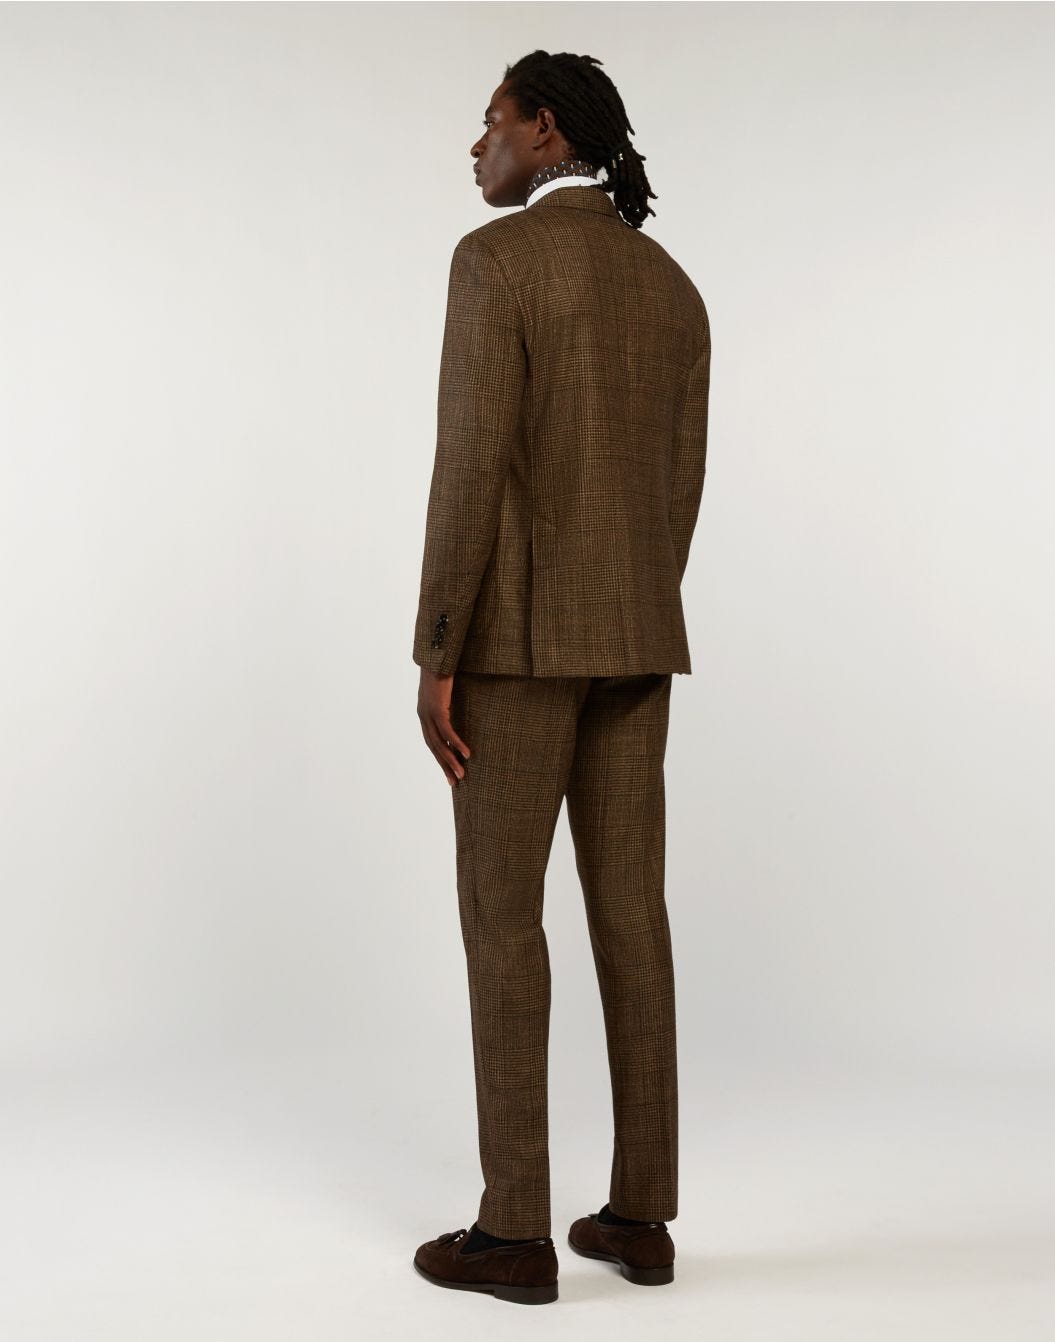 Brown suit in wool and cashmere - Supersoft